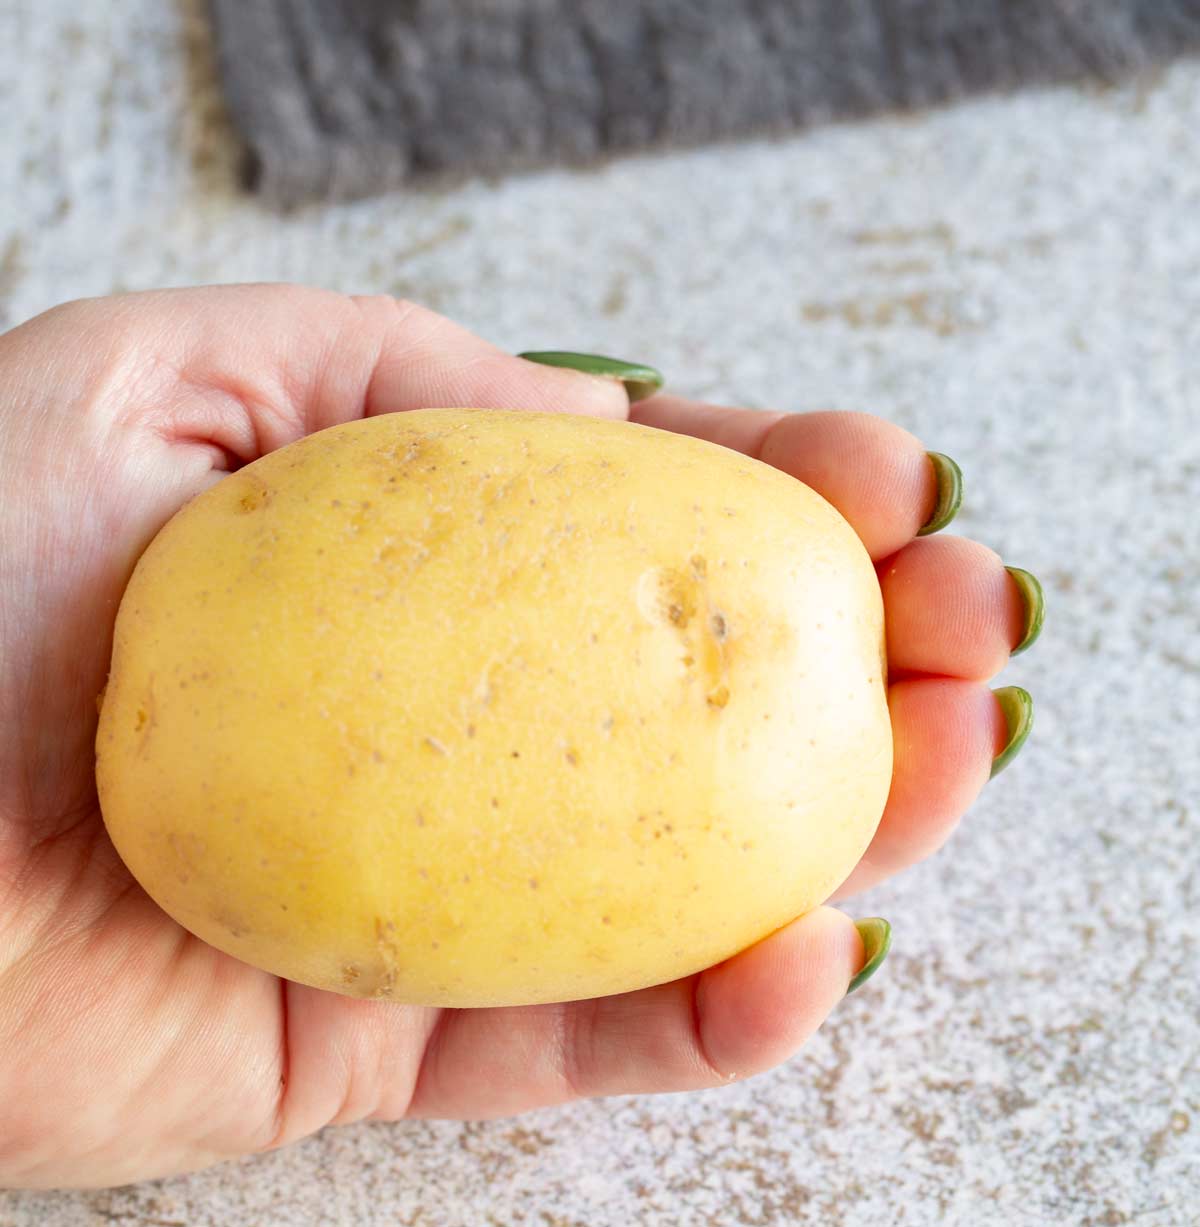 a hand holding a medium sized potato for size comparison